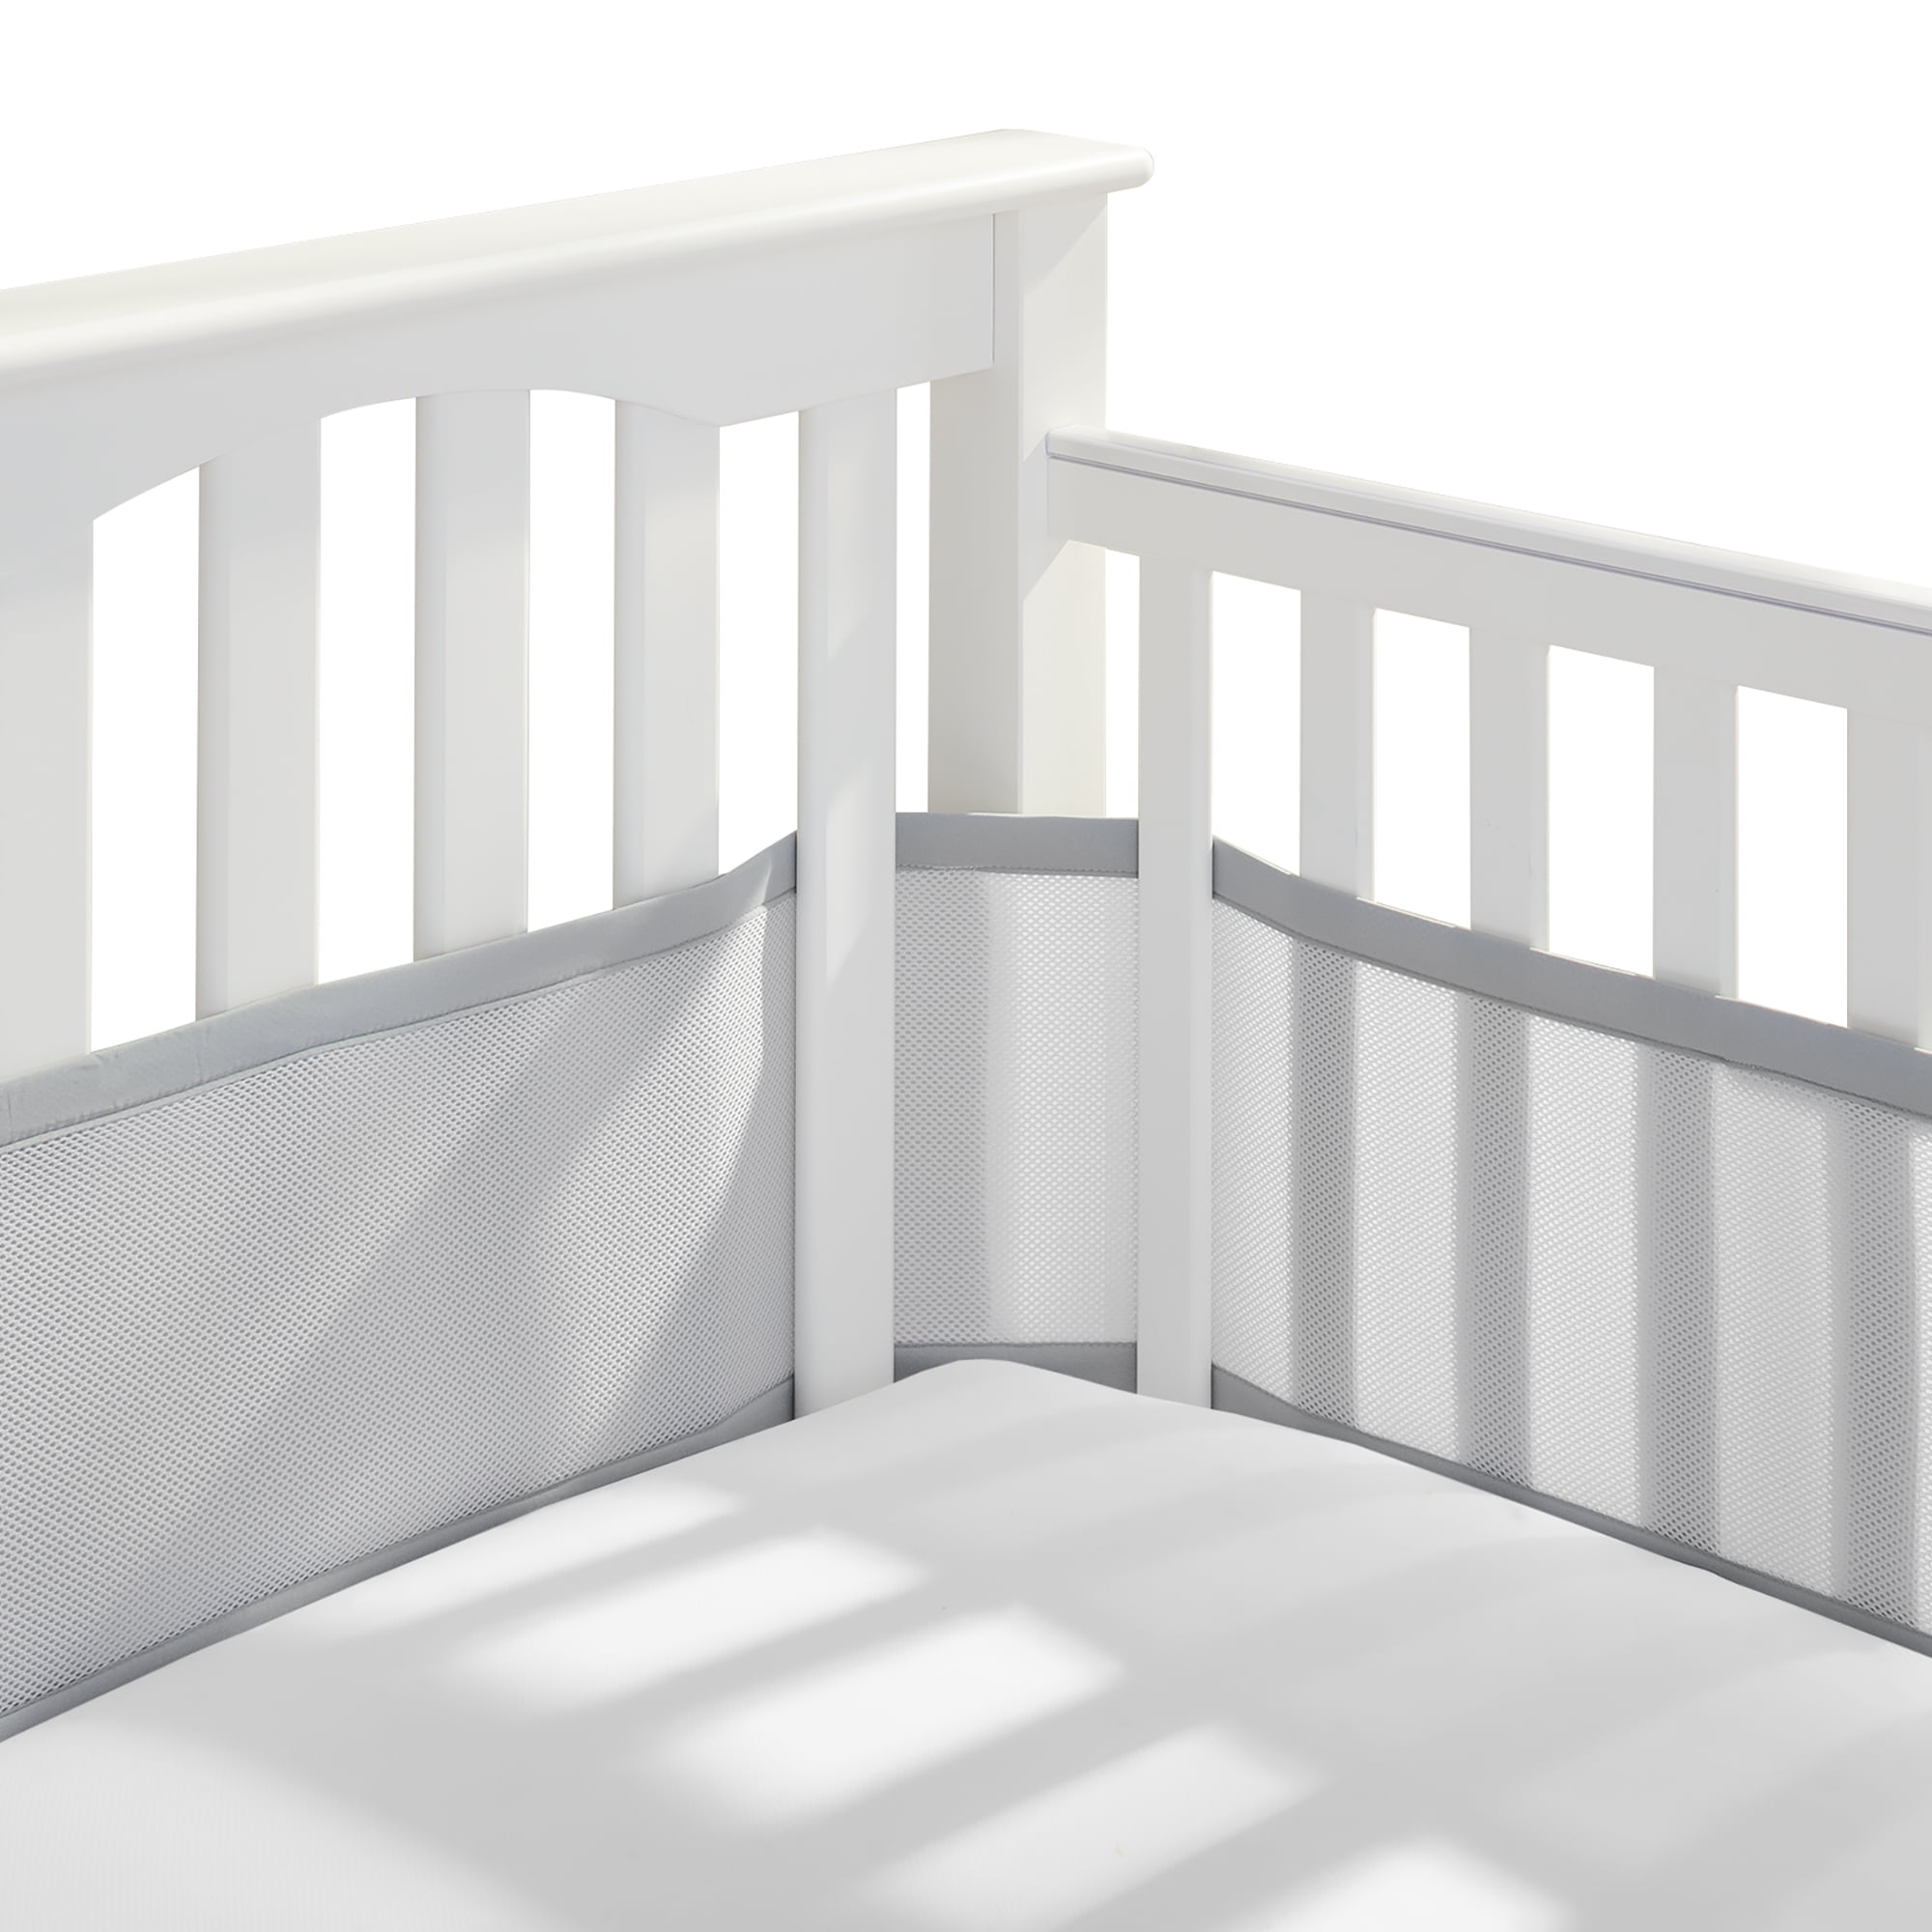 Infant,Kids Children Safety Bumpers on Crib Unichart Crib Bumpers for Baby